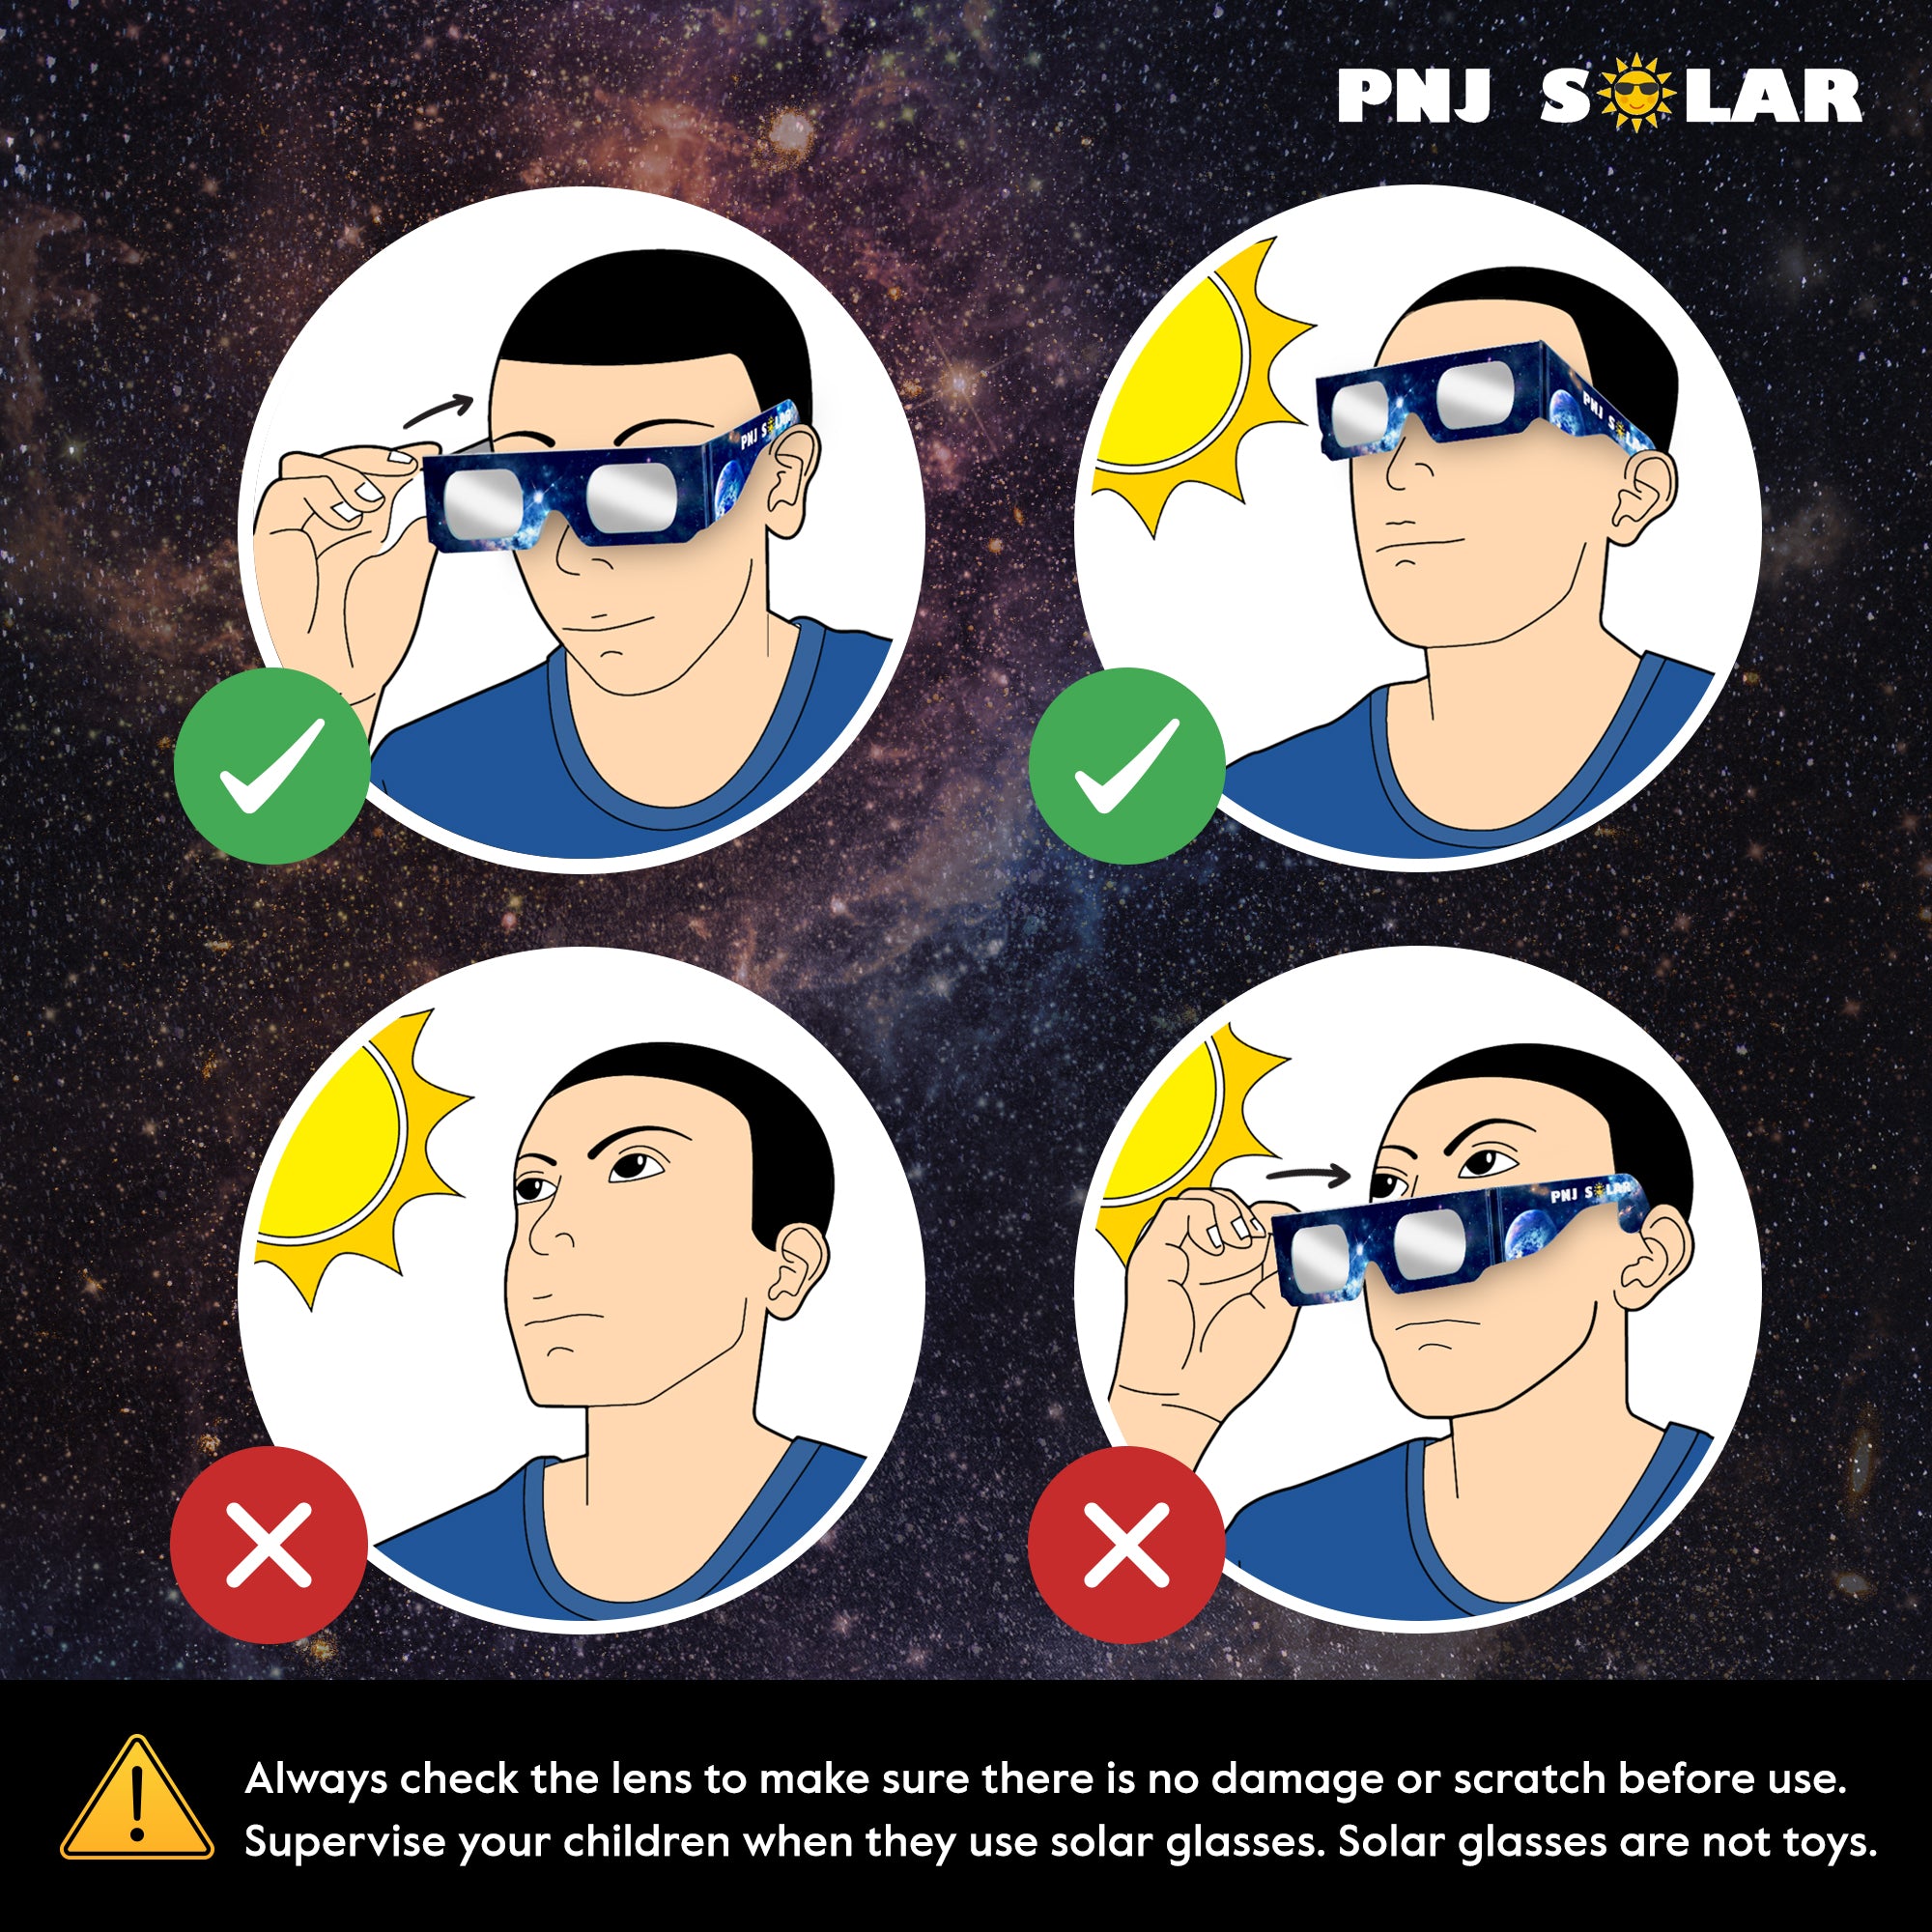 How to use solar eclipse glasses